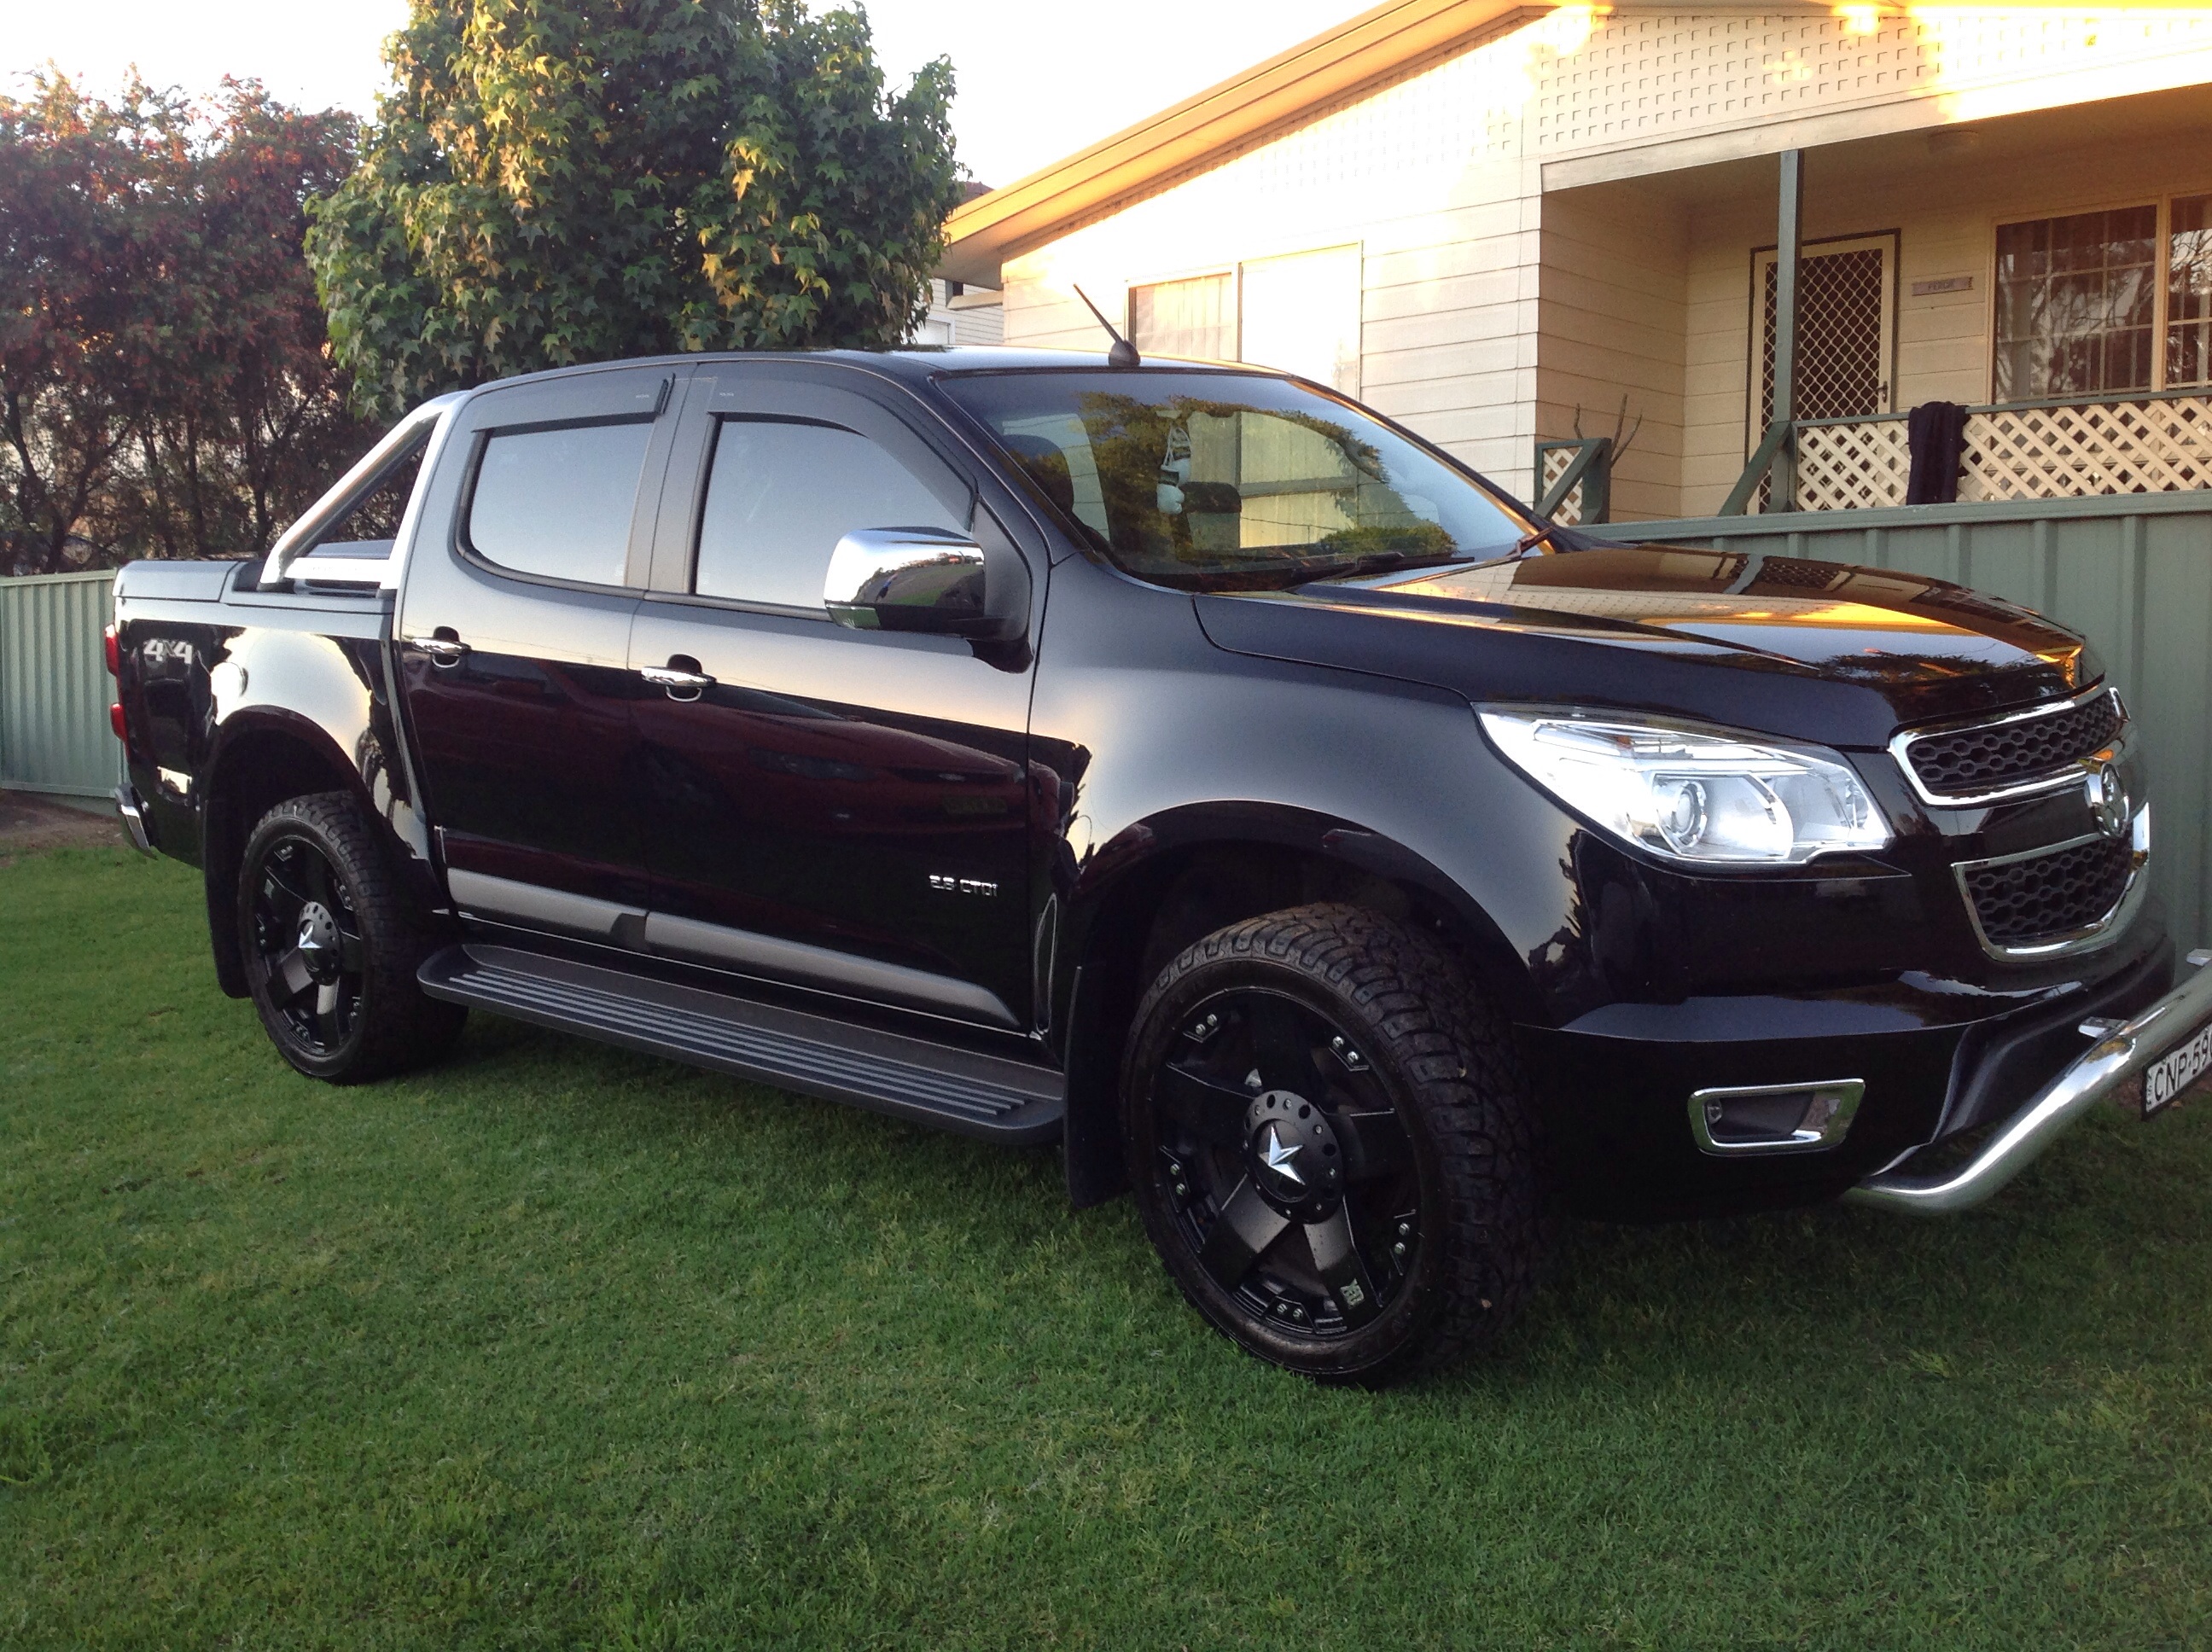 2012 holden colorado for sale